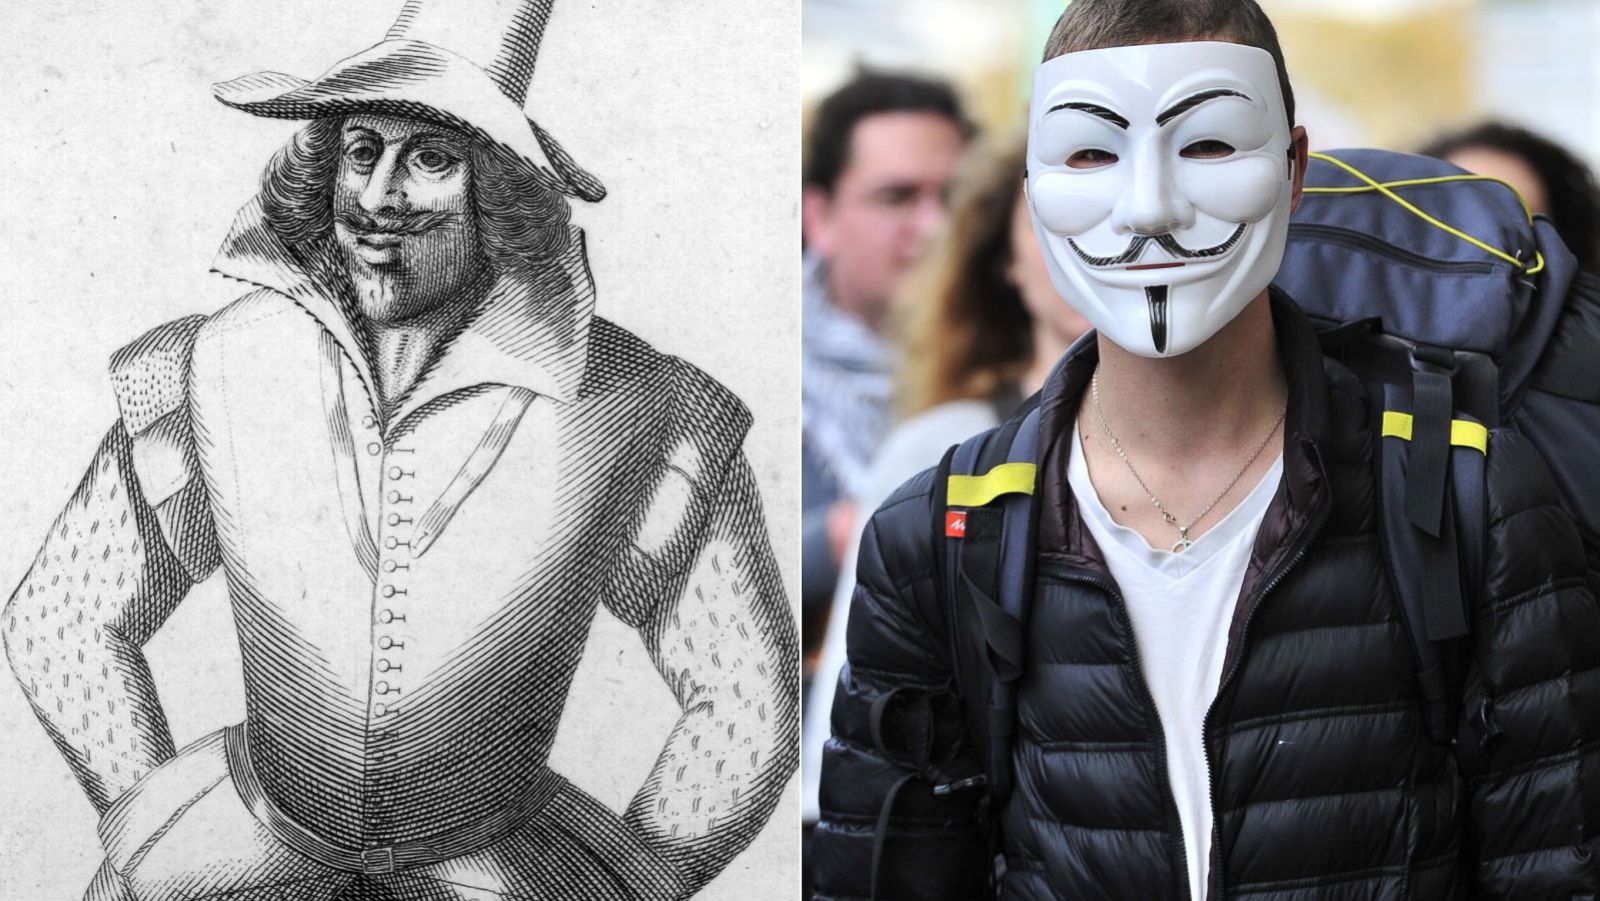 Guy Fawkes Night Famous Mask on Through Anonymous - ABC News